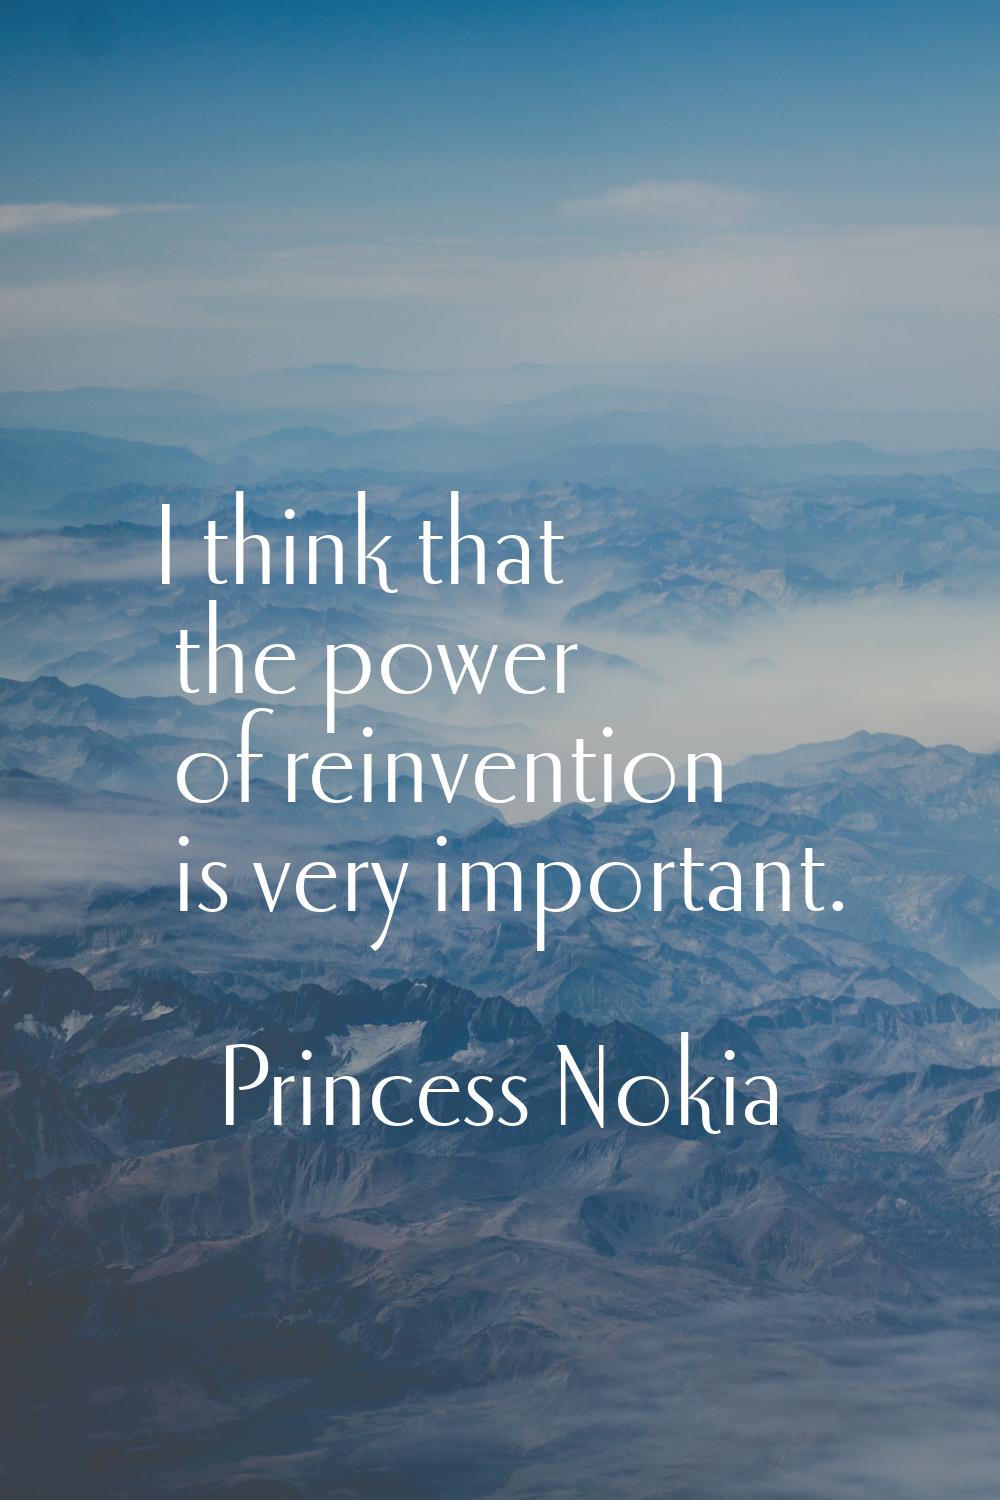 I think that the power of reinvention is very important.